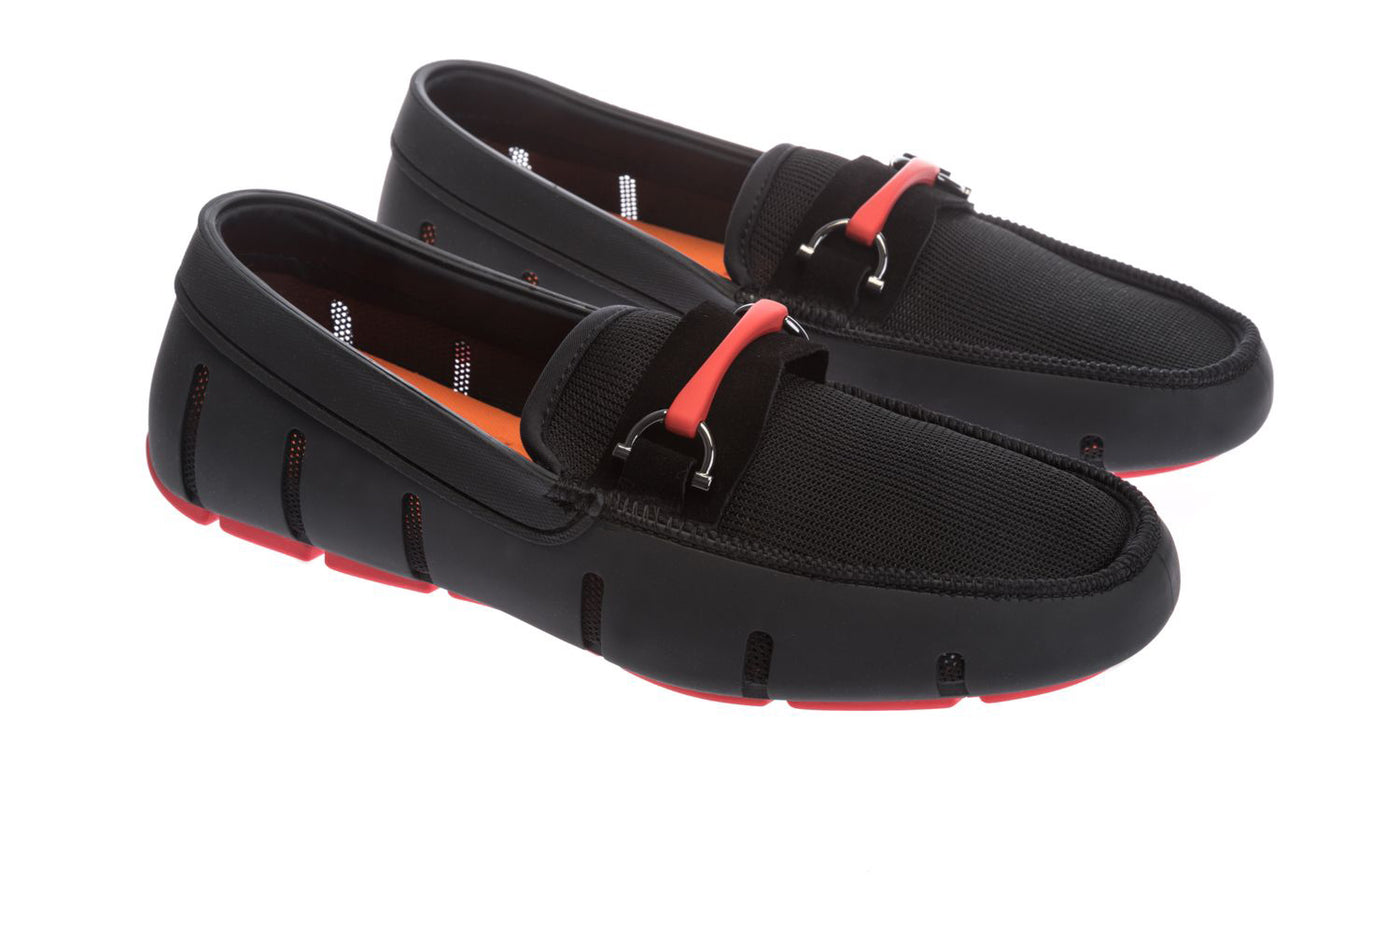 Swims The Sporty Bit Loafer Shoe in Black Pair 2